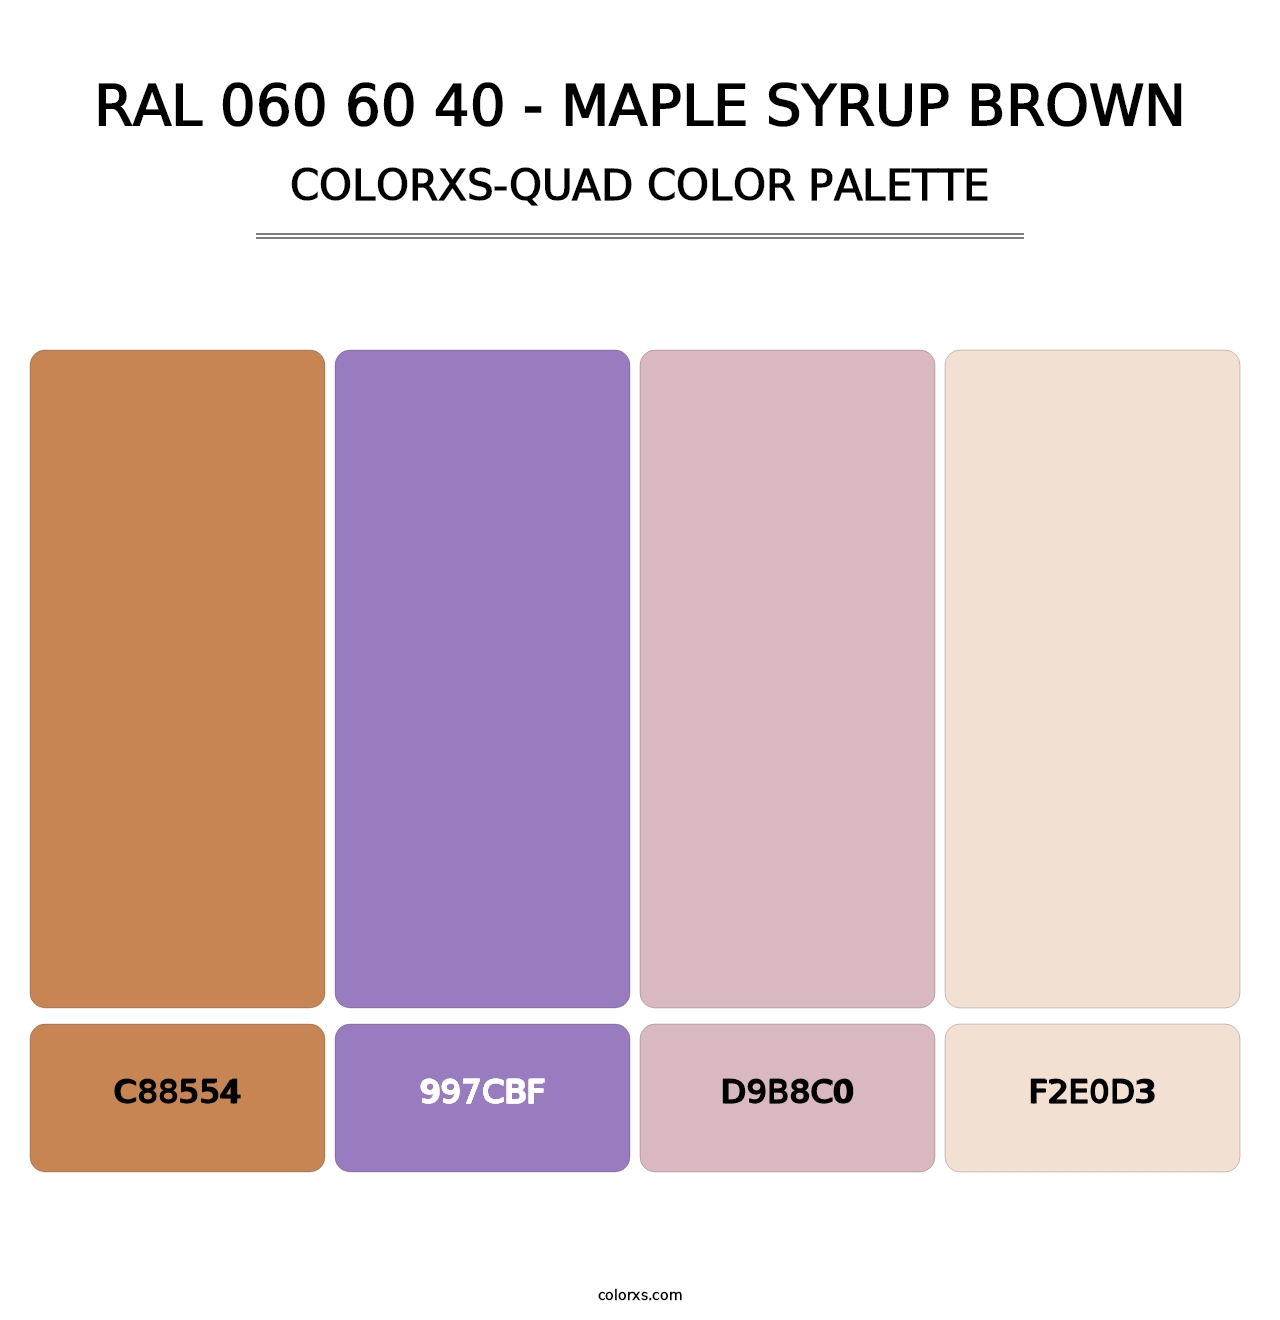 RAL 060 60 40 - Maple Syrup Brown - Colorxs Quad Palette